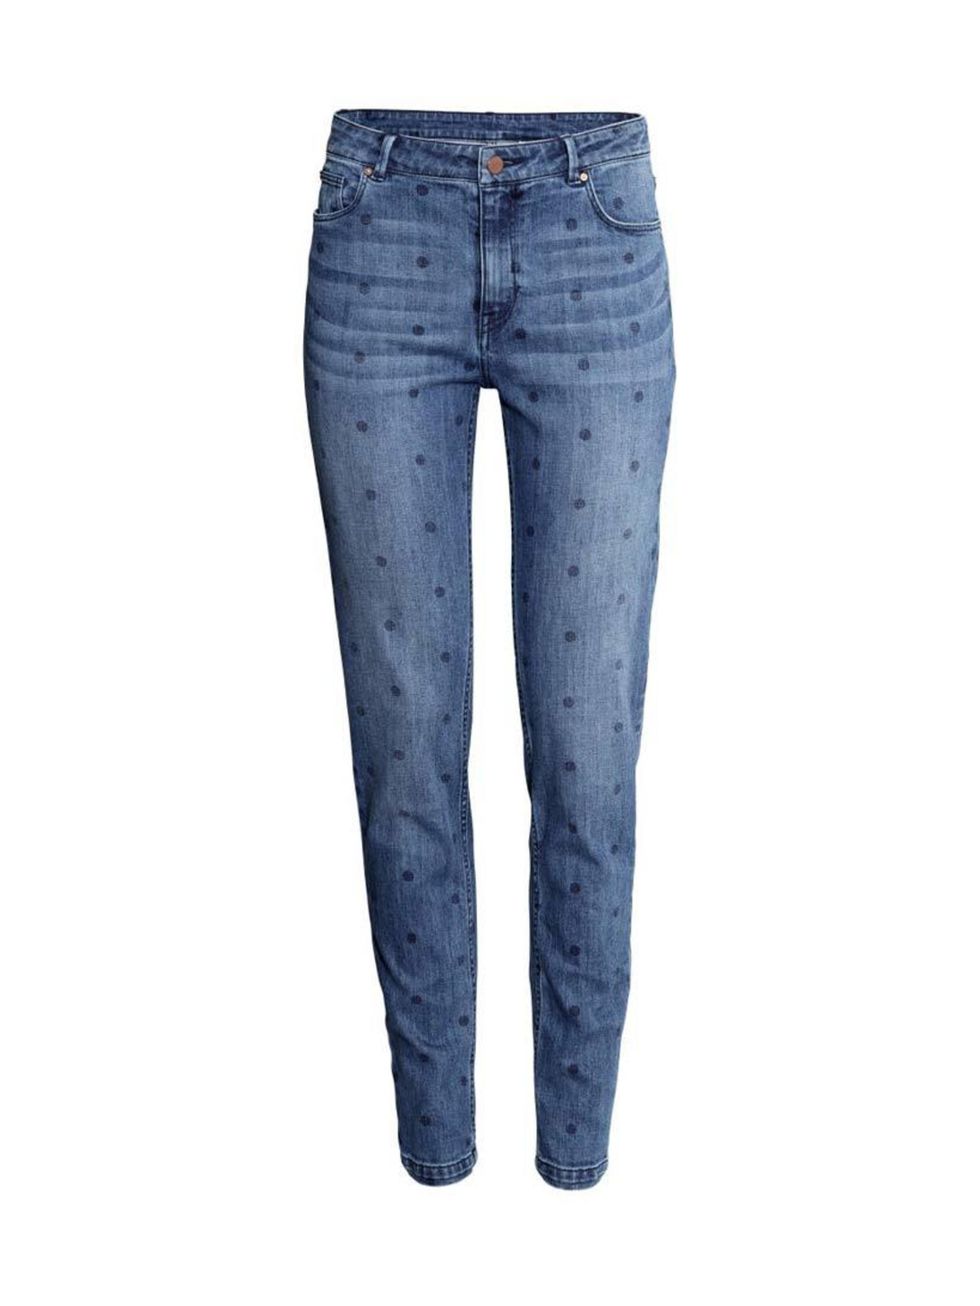 <p>Denim with a difference.</p>

<p><a href="http://www.hm.com/gb/product/43134?article=43134-C" target="_blank">H&M</a> jeans, £29.99</p>